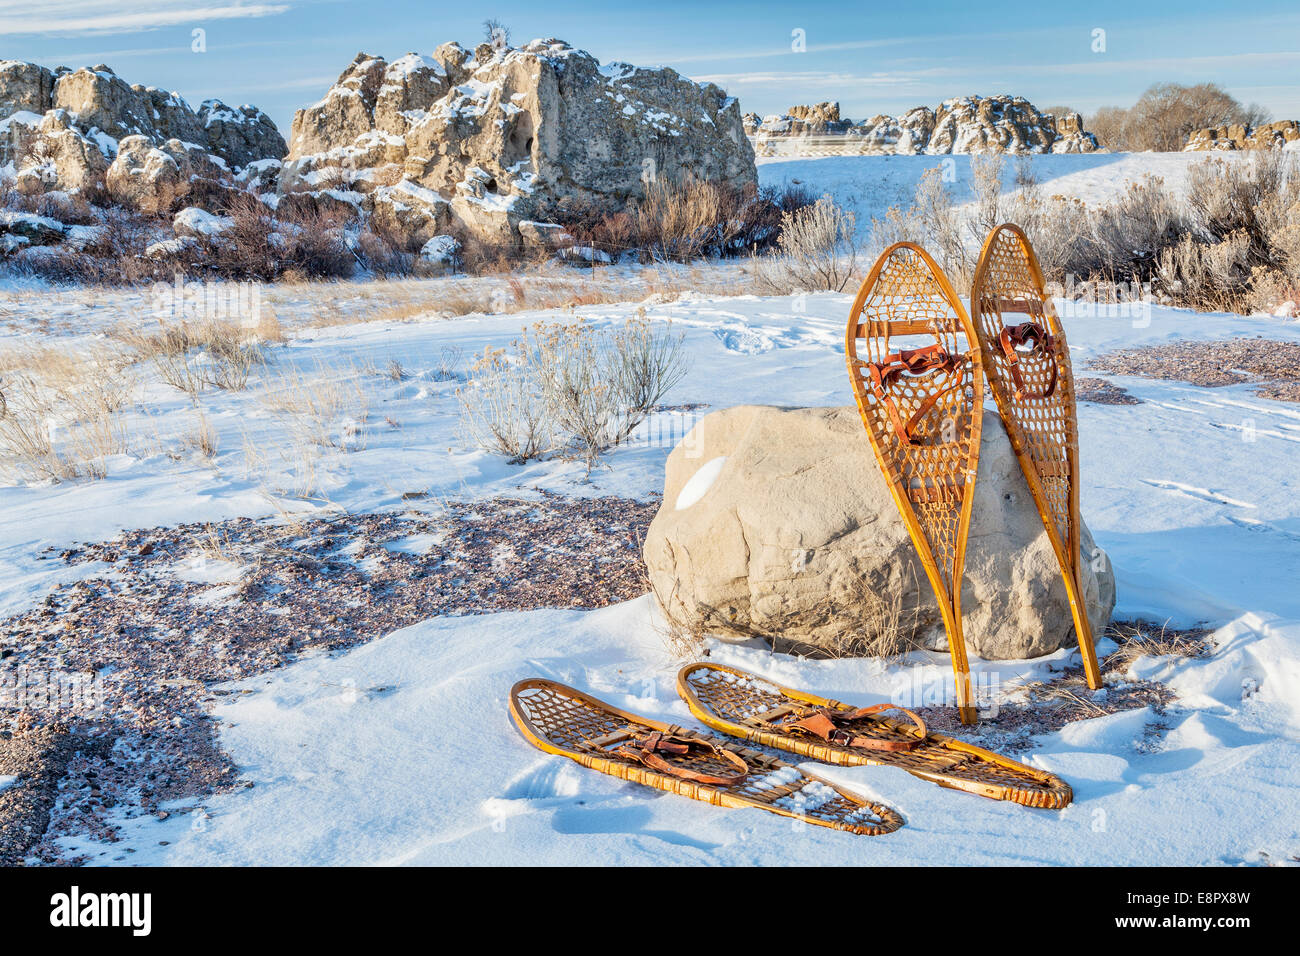 vintage Huron and Bear Paw snowshoes in winter scenery on a parking lot or trailhead Stock Photo